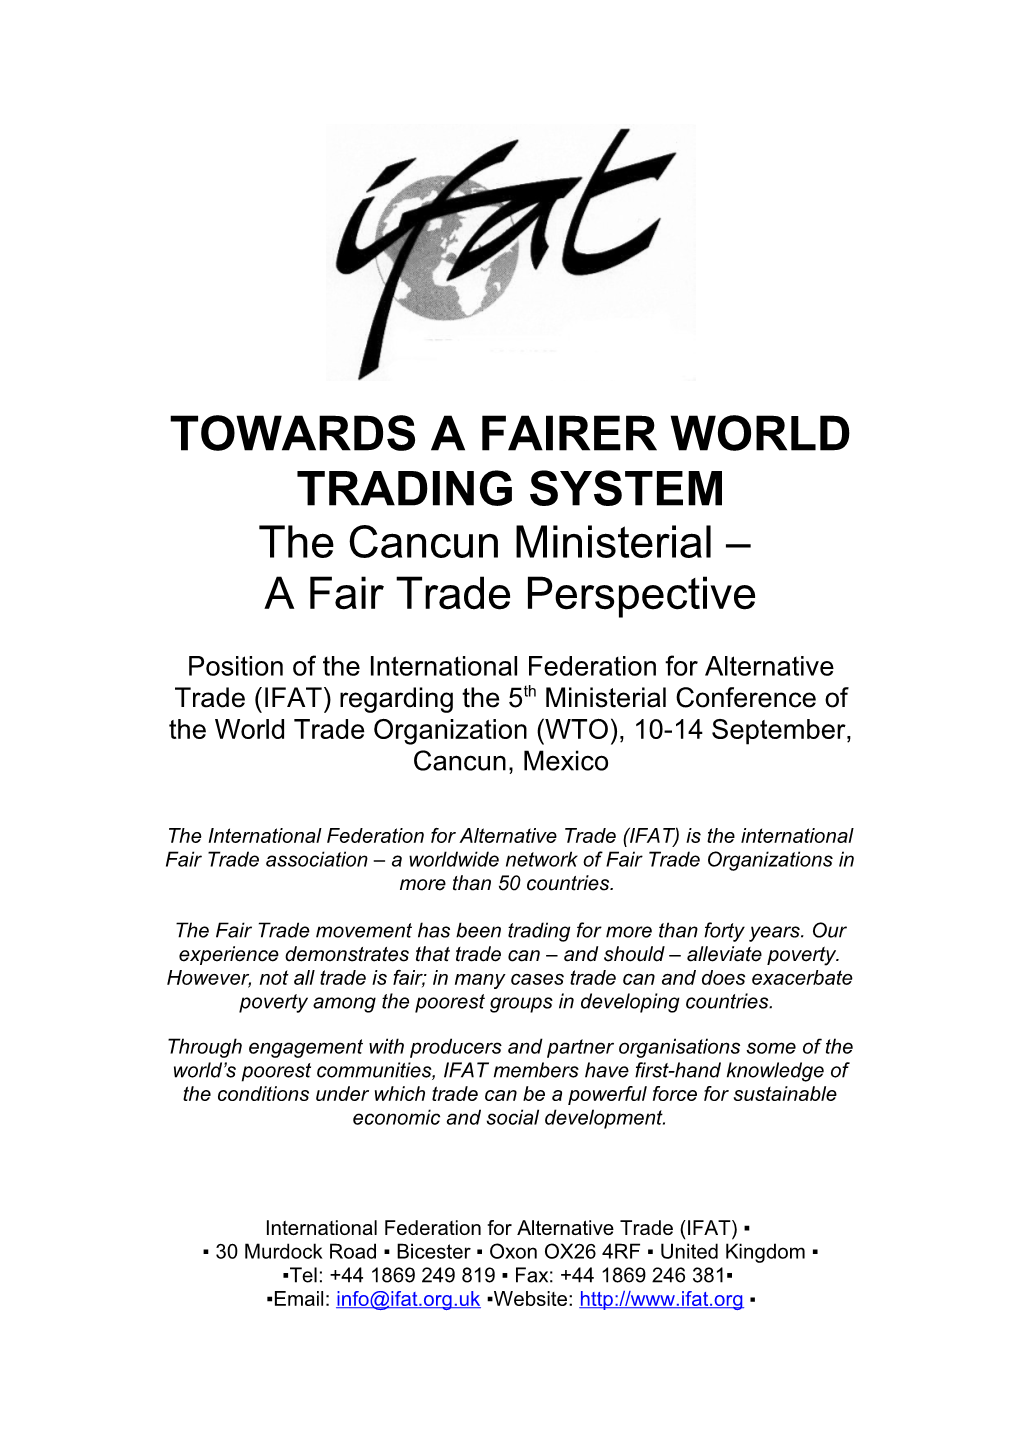 Towards a Fairer World Trading System